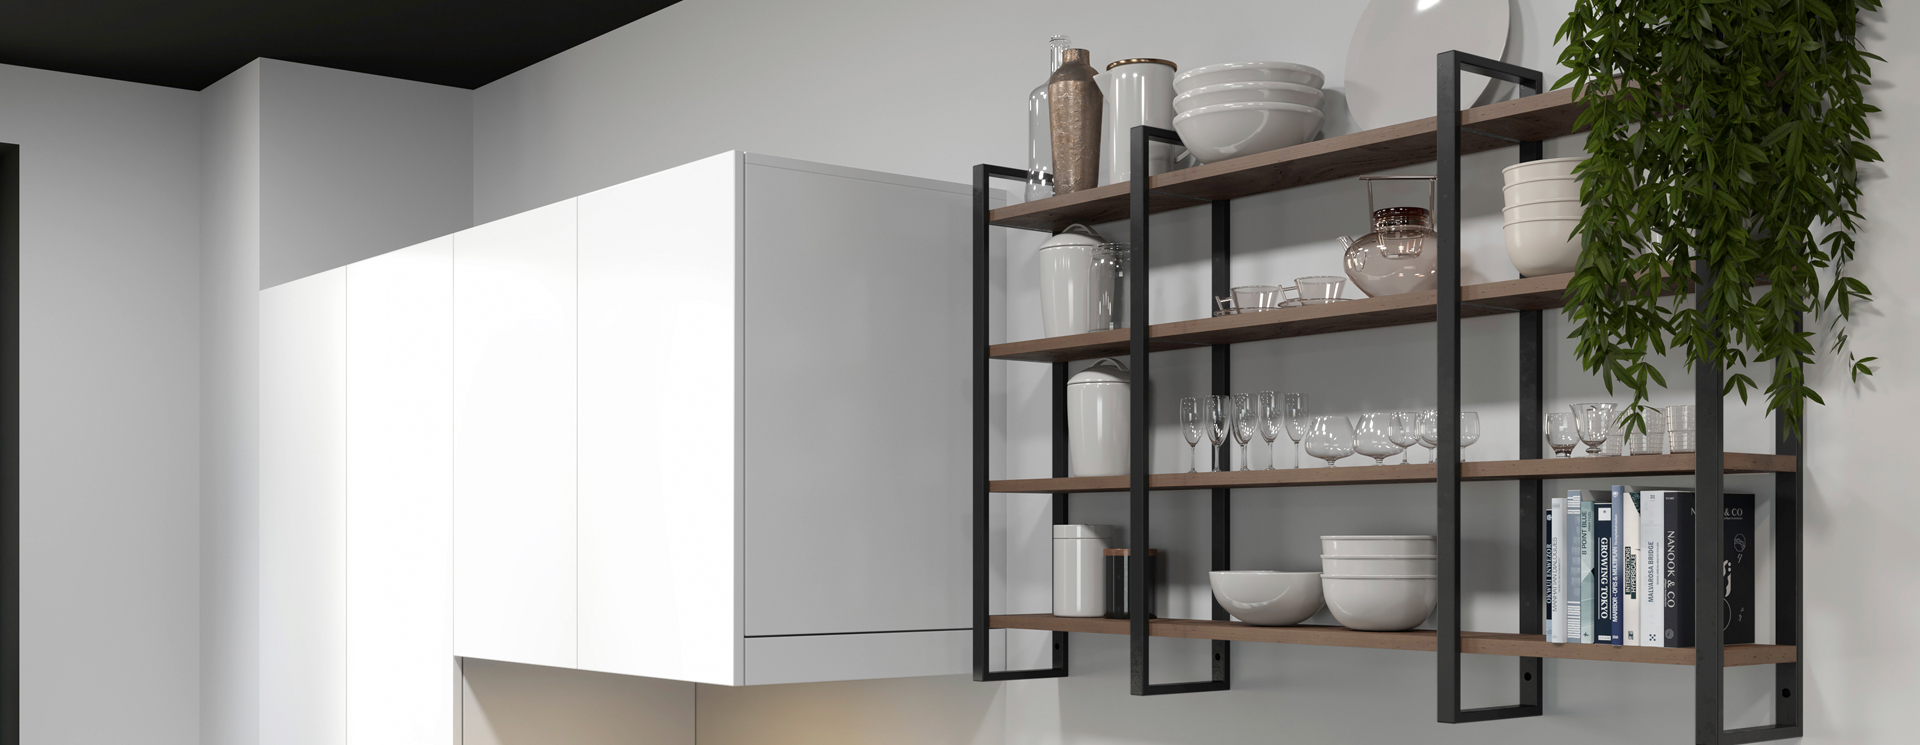 5 Kitchen Storage Solutions To Make Your Life Easy - Kesseboehmer